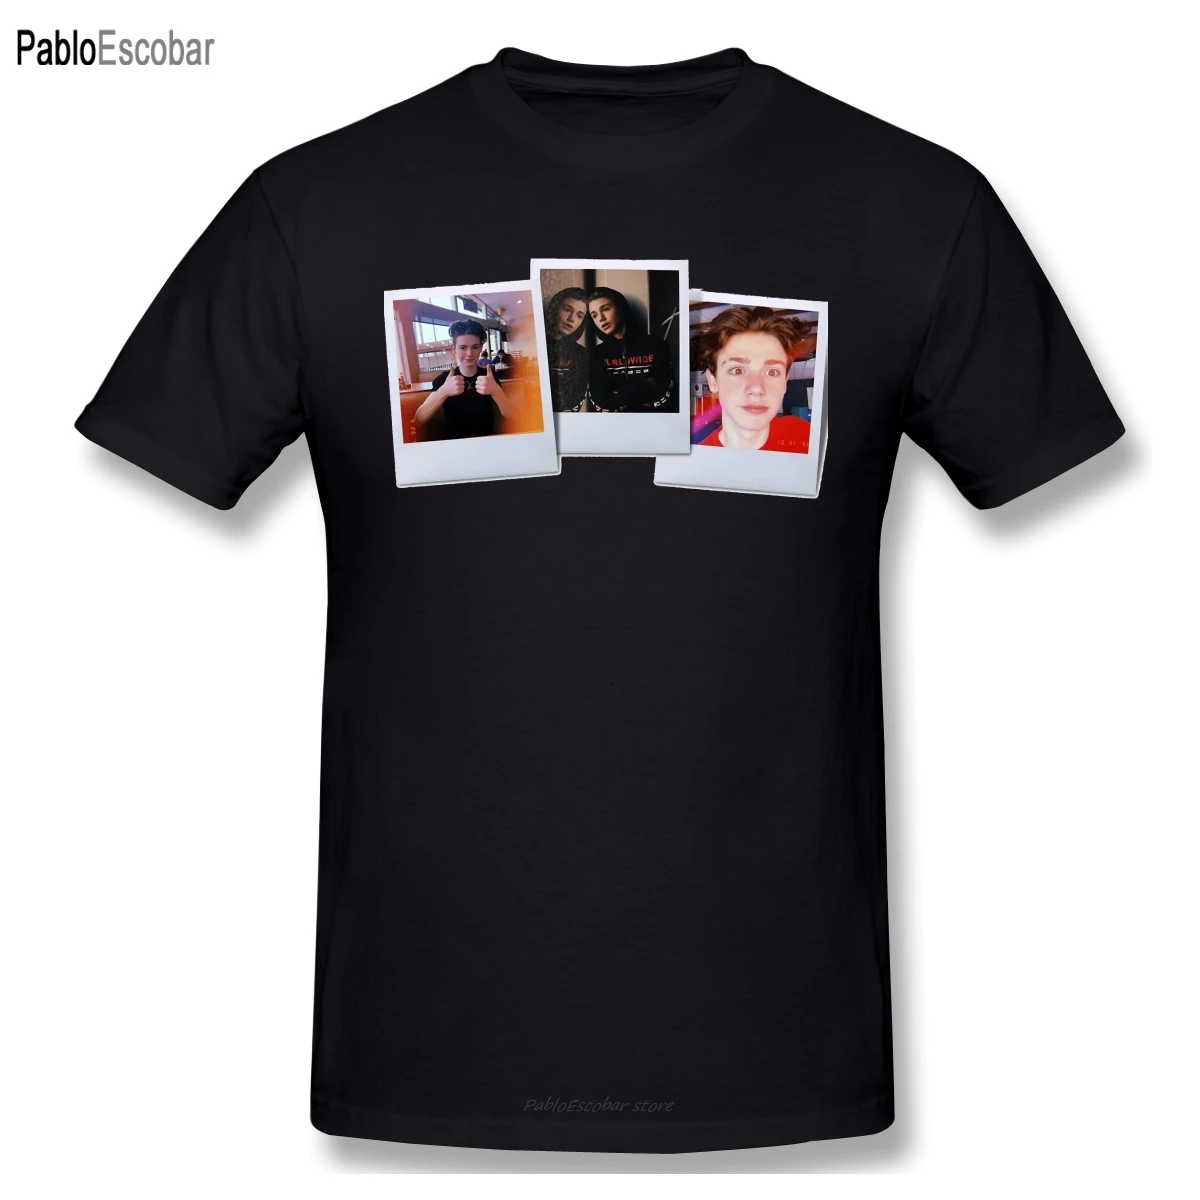 T Shirts Men Photos T-shirt High Quality Tee Father Day Tops 100% Cotton Clothing payton moormeier Pure Cotton Tees